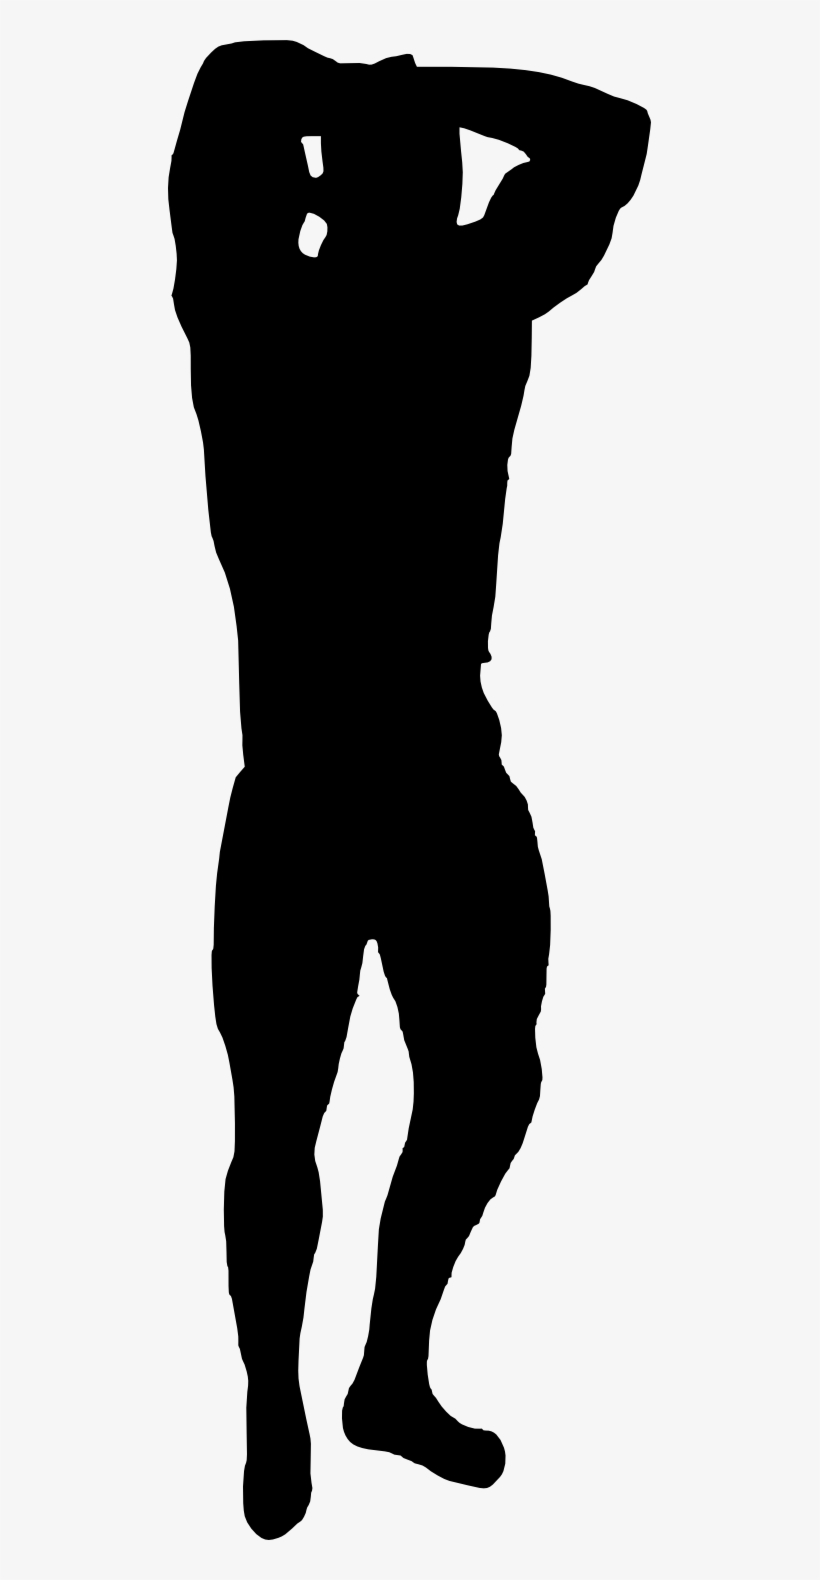 Free Png Muscle Man Bodybuilder Silhouette Png Images - Silhouette Bodybuilder Transparent, transparent png #988778